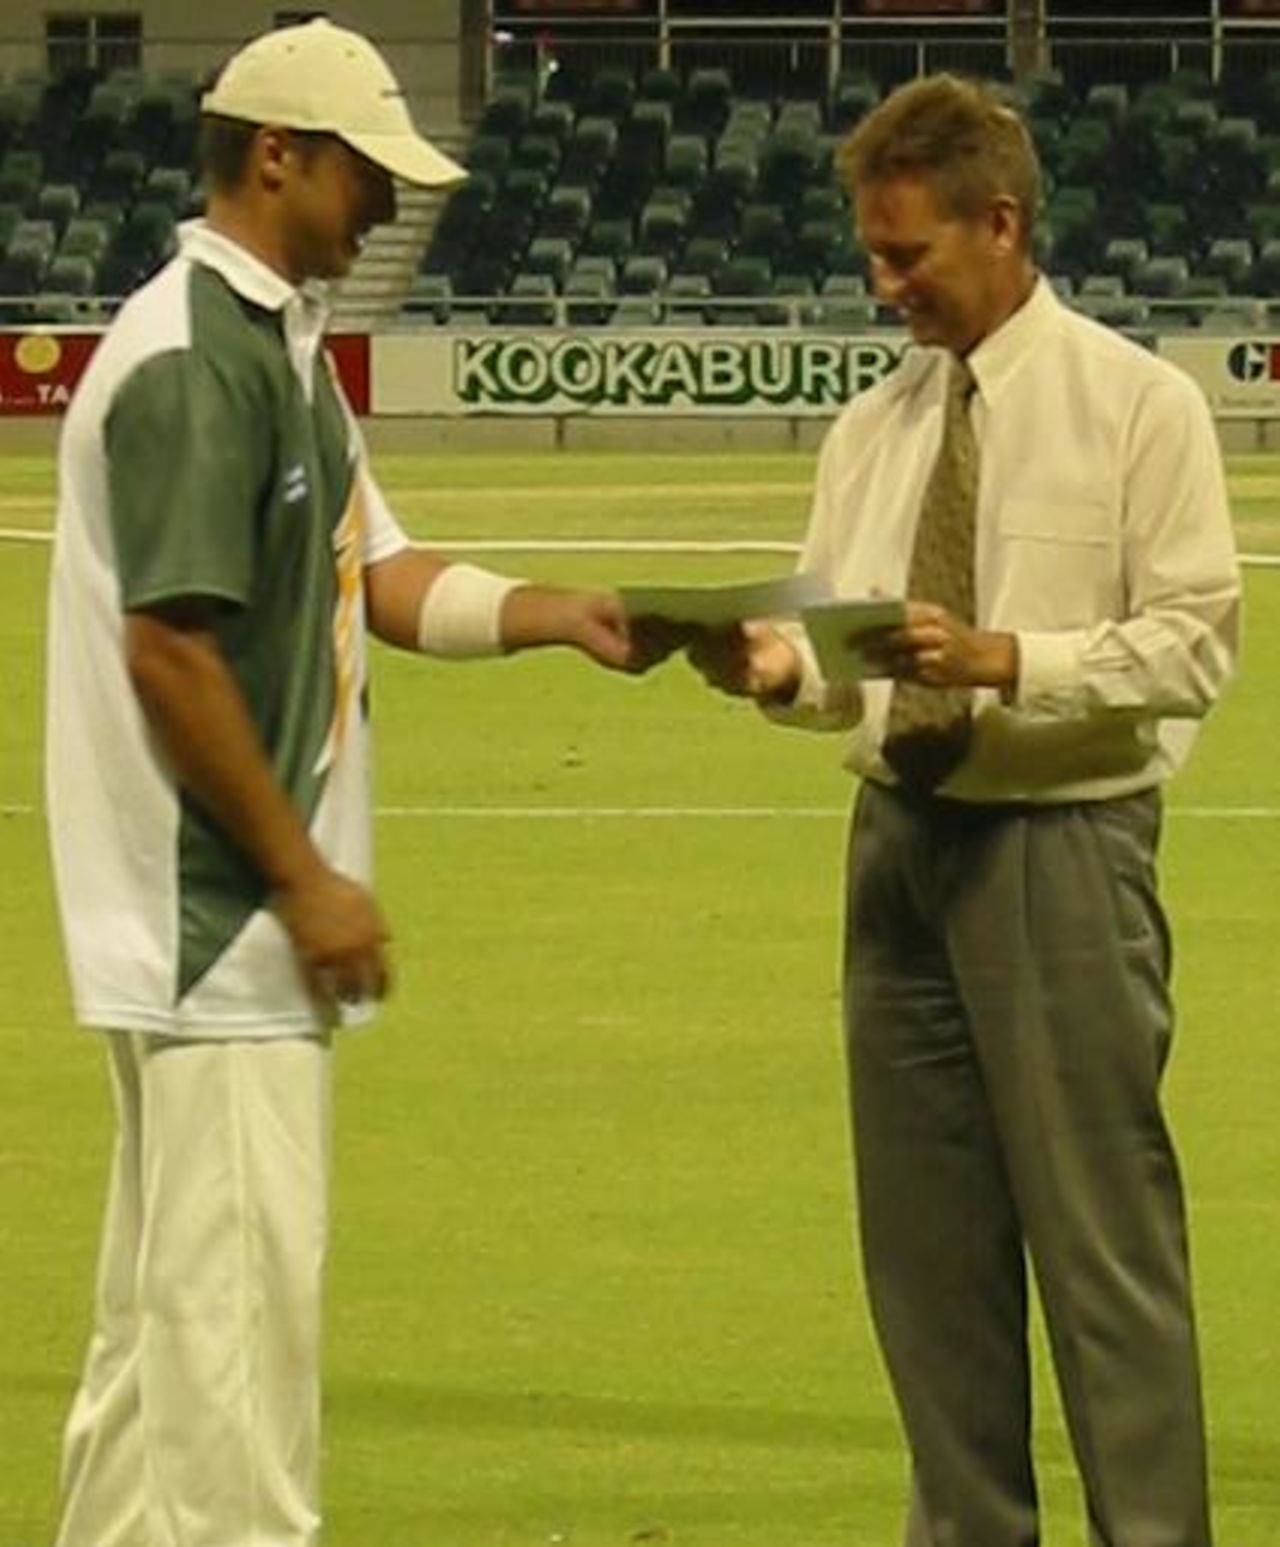 Scarborough batsman Rob Baker accepting a cheque for being the man of the match in the Sunday League final of 2002-03.  Baker scored 132 runs from 138 balls with 19 fours.